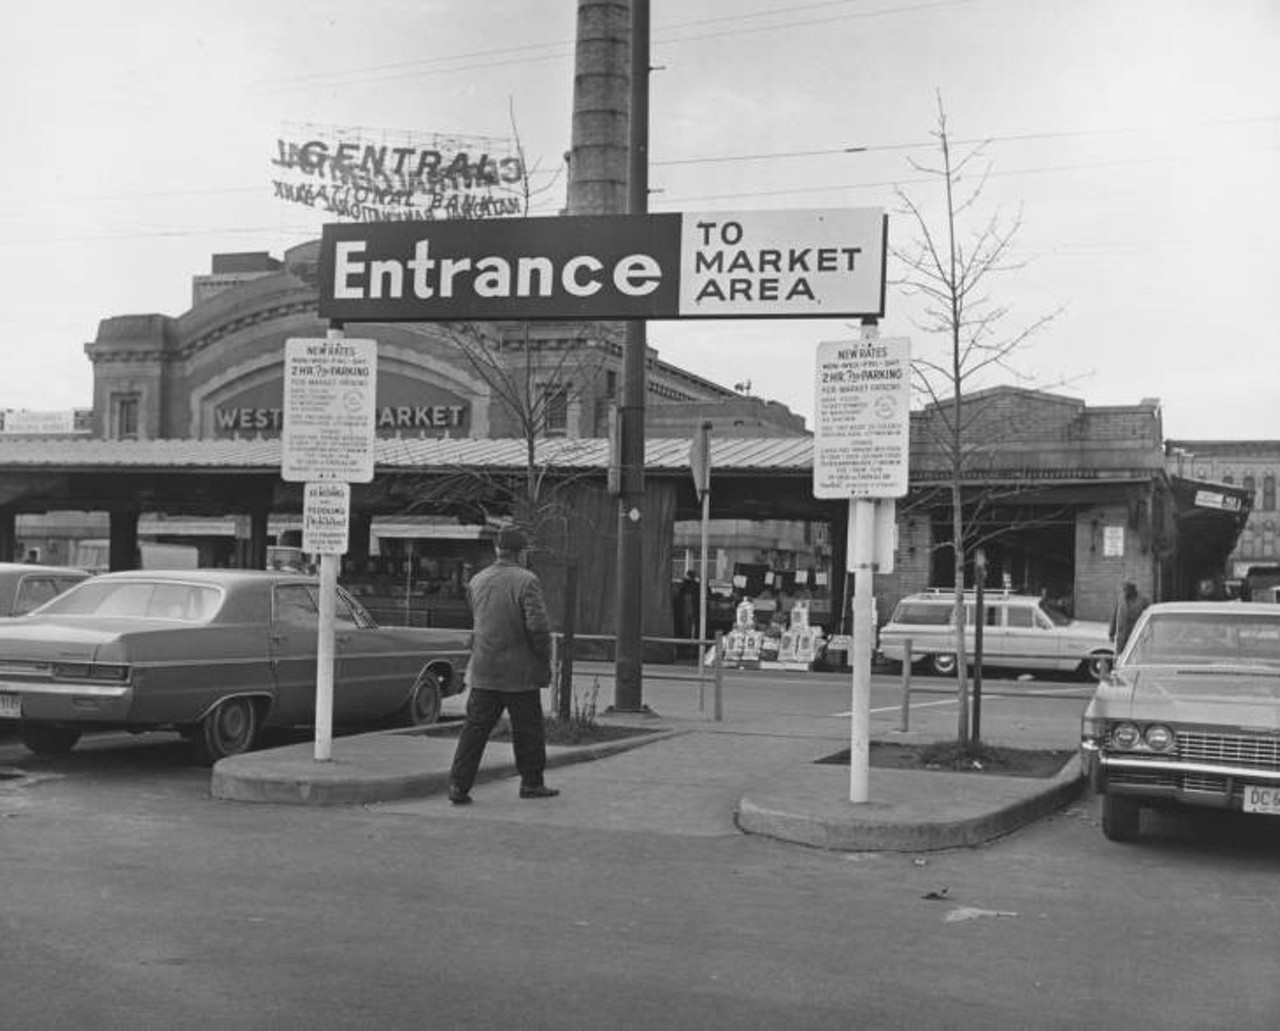 Looking toward the back of the market from the parking lot. Taken November 17, 1969.